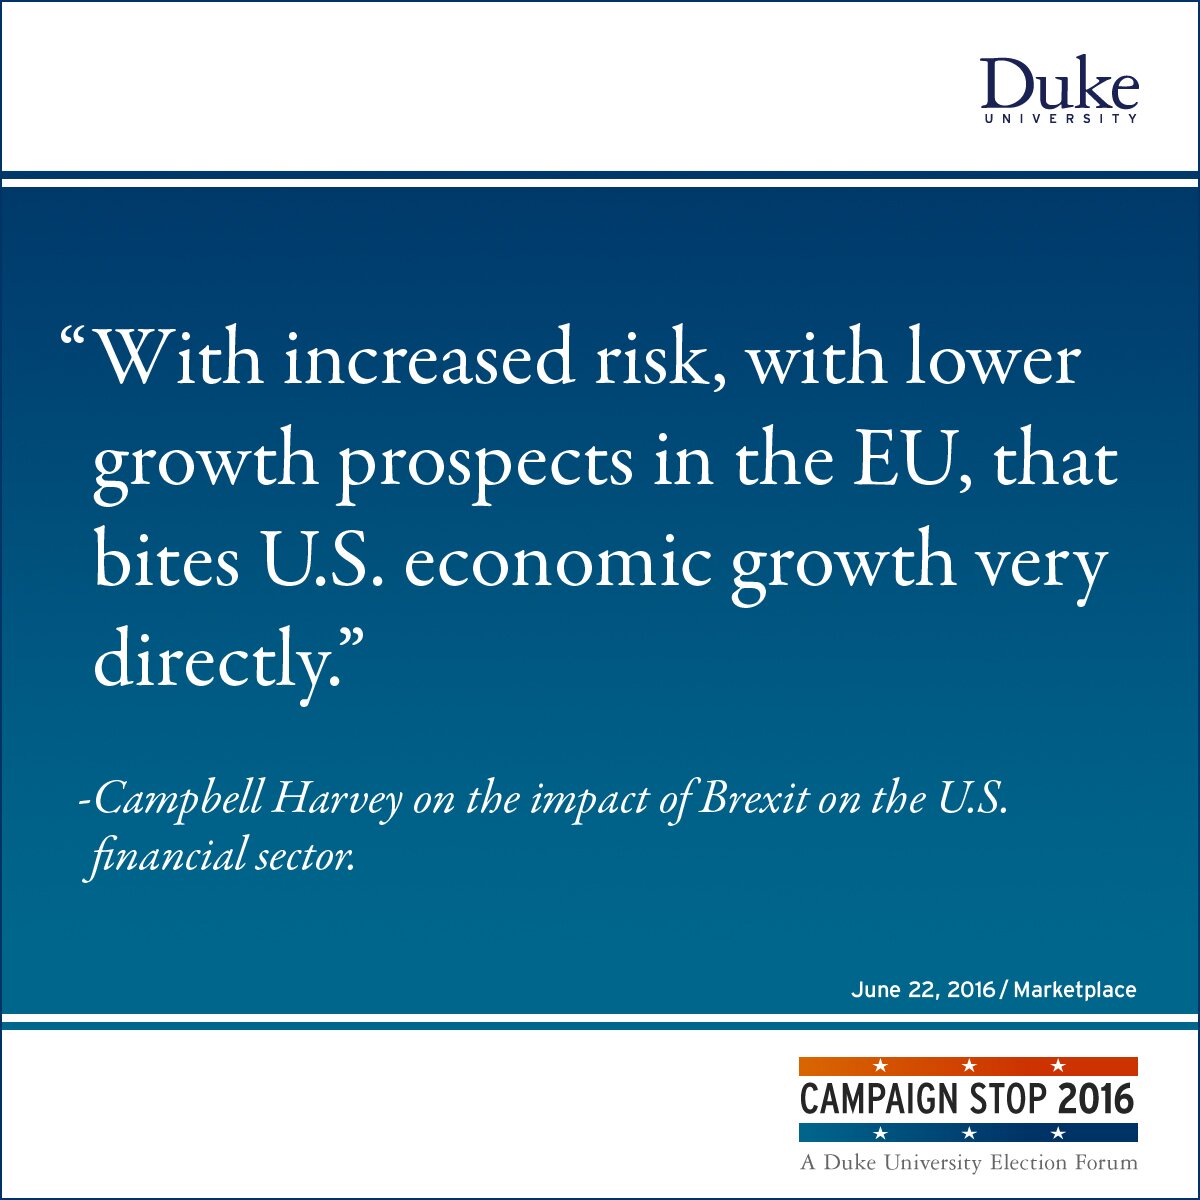 “With increased risk, with lower growth prospects in the EU, that bites U.S. economic growth very directly.” -Campbell Harvey on the impact of Brexit on the U.S. financial sector.